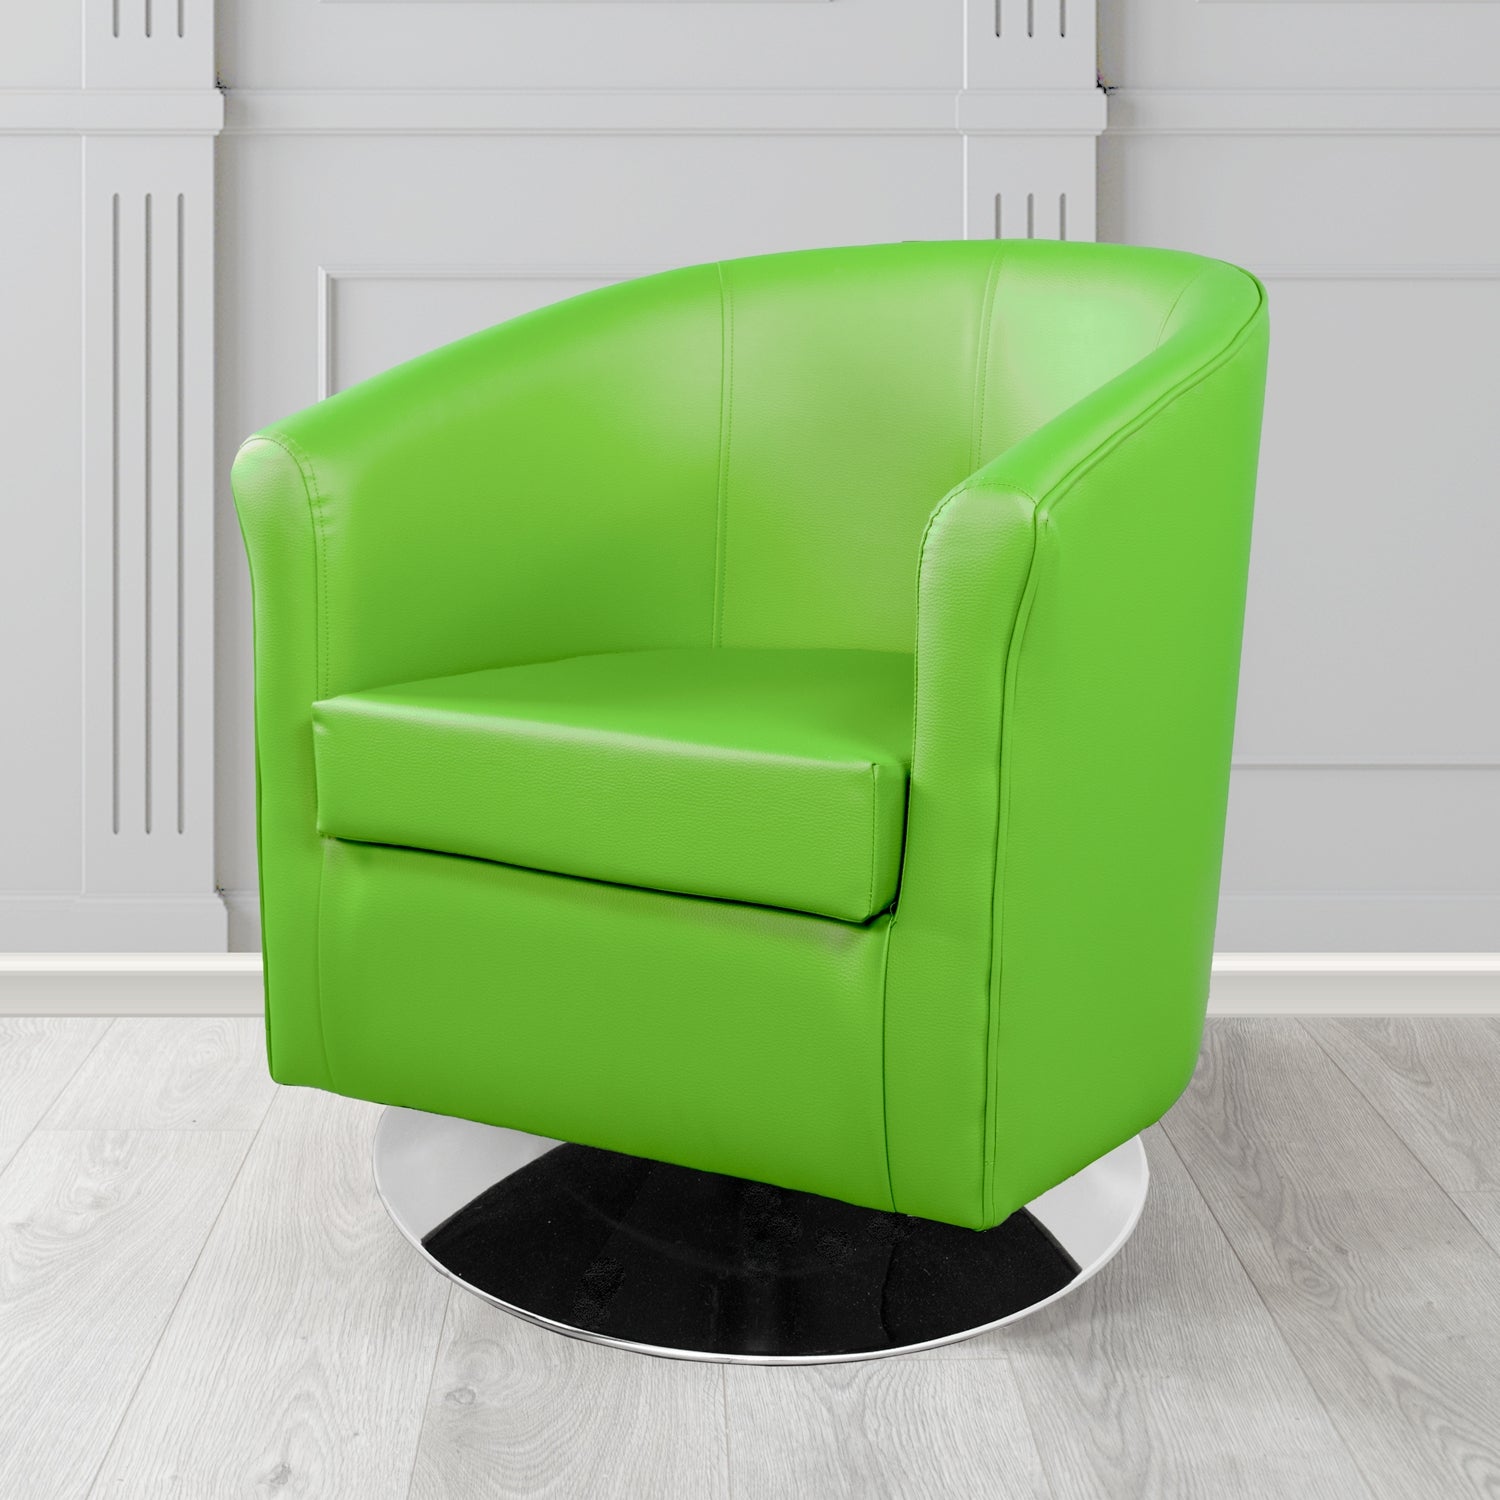 Tuscany Swivel Tub Chair in Madrid Lime Faux Leather - The Tub Chair Shop